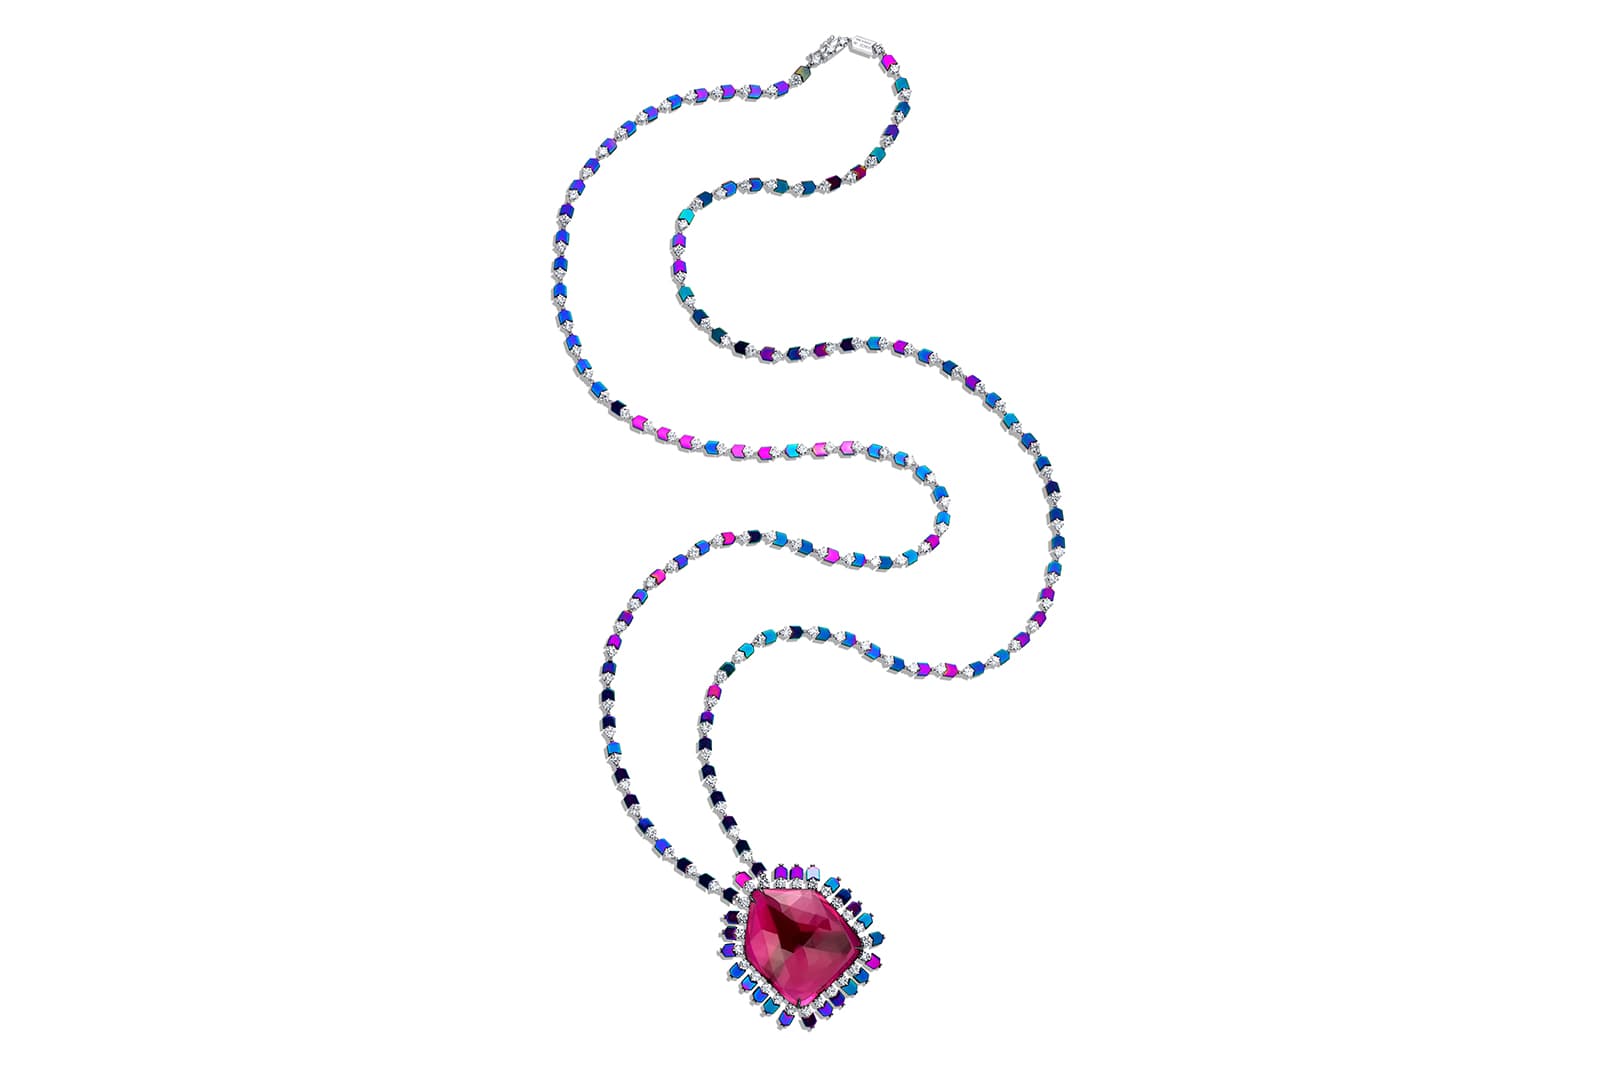 K&Co London Everlasting Love necklace with a rose-cut rubellite and diamonds in aluminium 